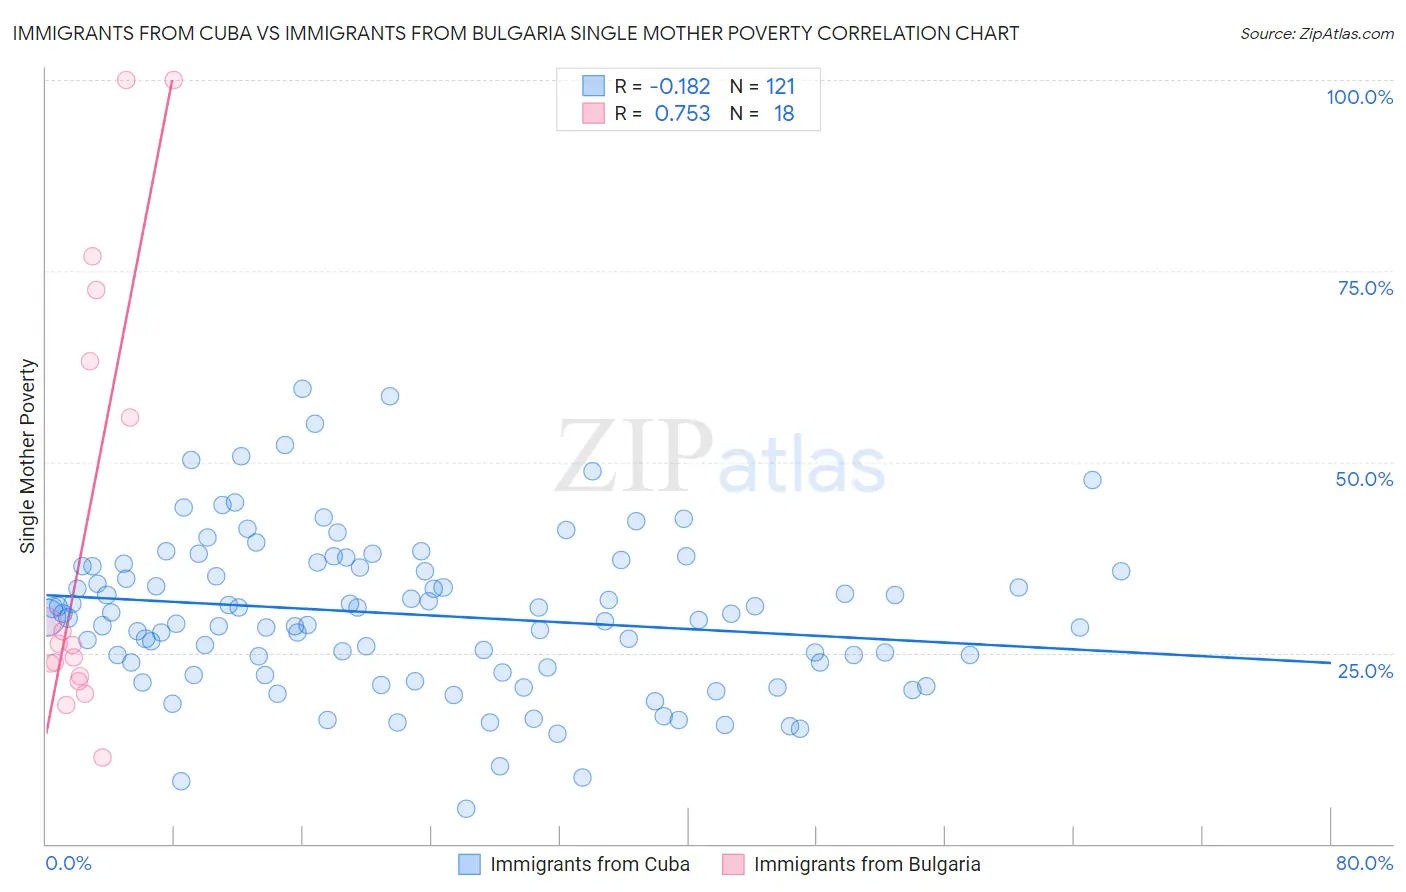 Immigrants from Cuba vs Immigrants from Bulgaria Single Mother Poverty